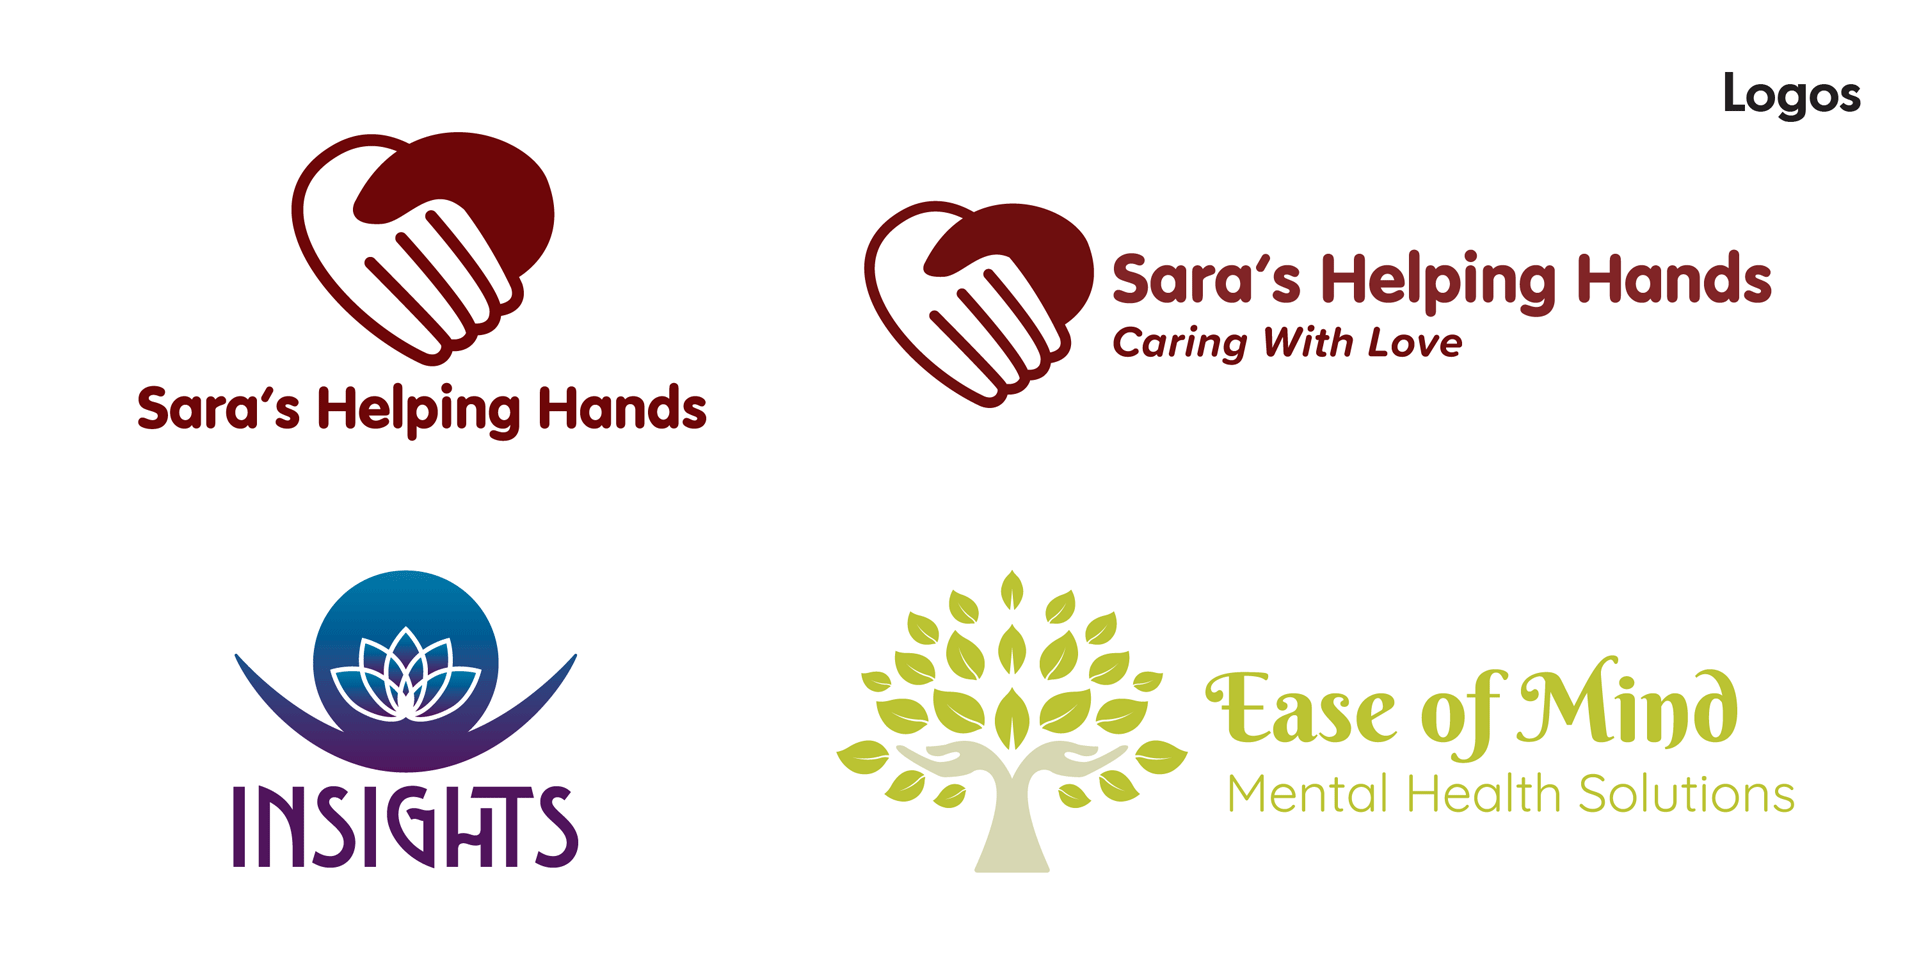 Logos designed by IH Concepts